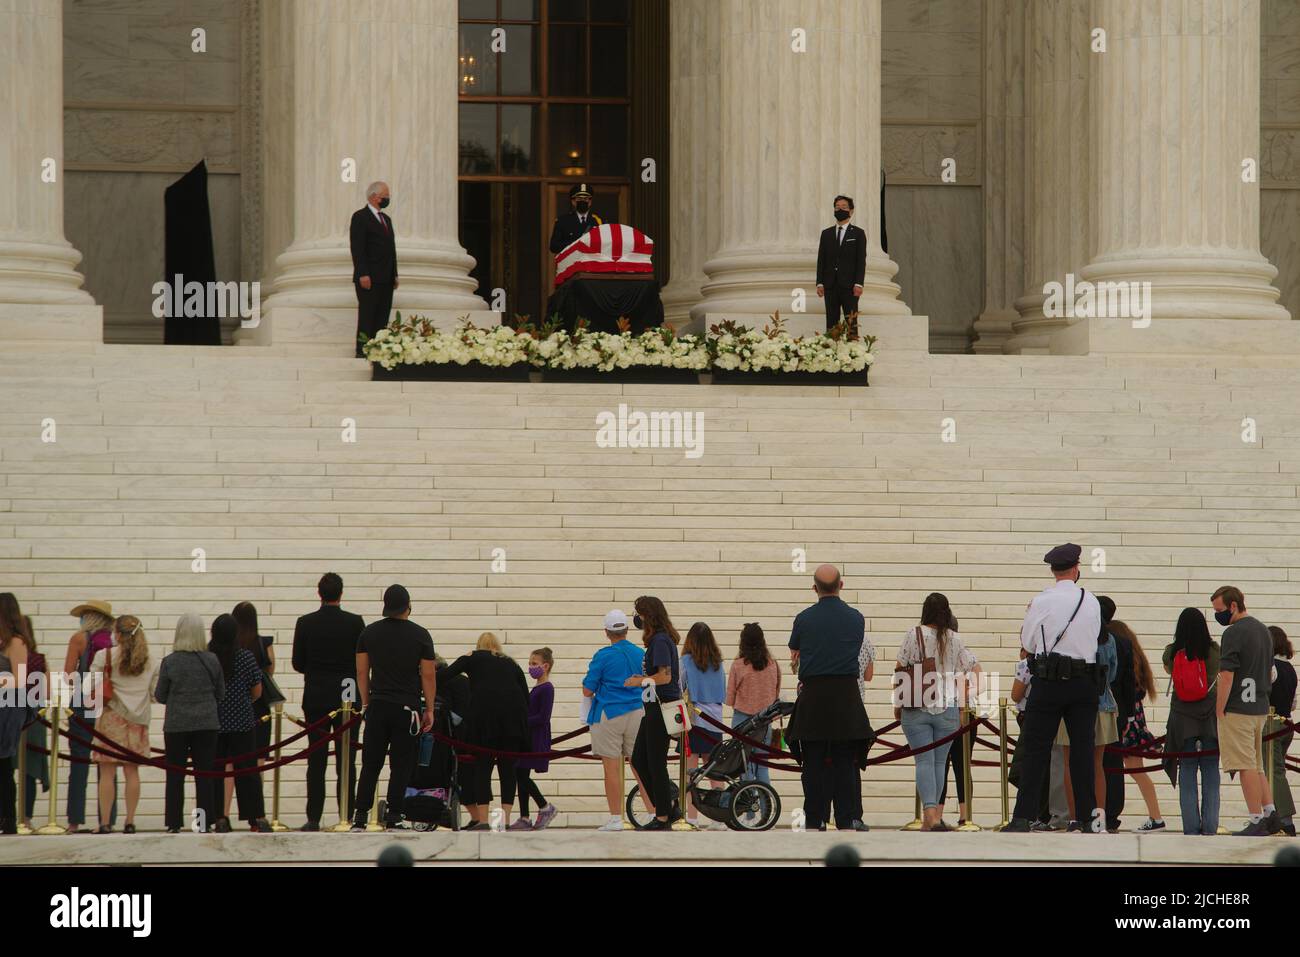 Washington - 24 September 2022: People line up to pay their respects to U.S. Supreme Court Justice Ruth Bader Ginsburg as her casket lies in state. Stock Photo